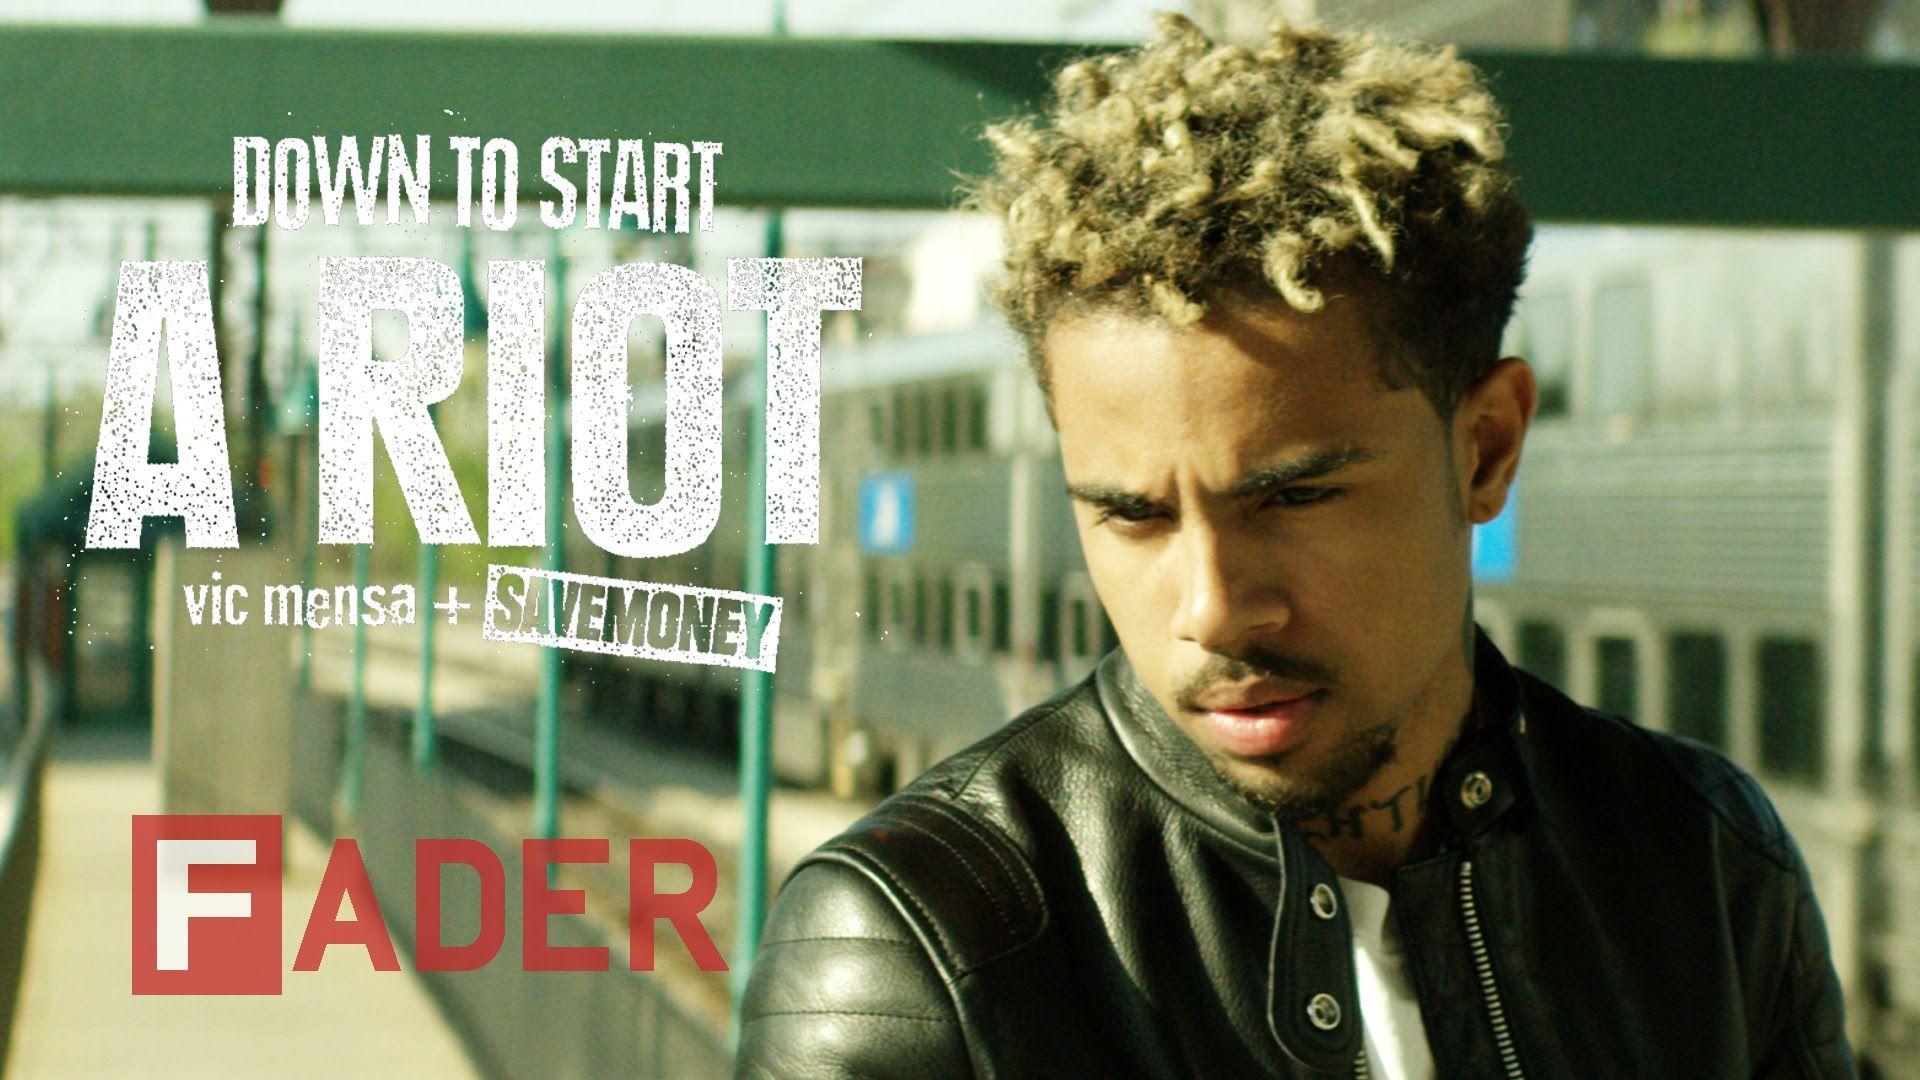 Vic Mensa To Start A Riot (Documentary)